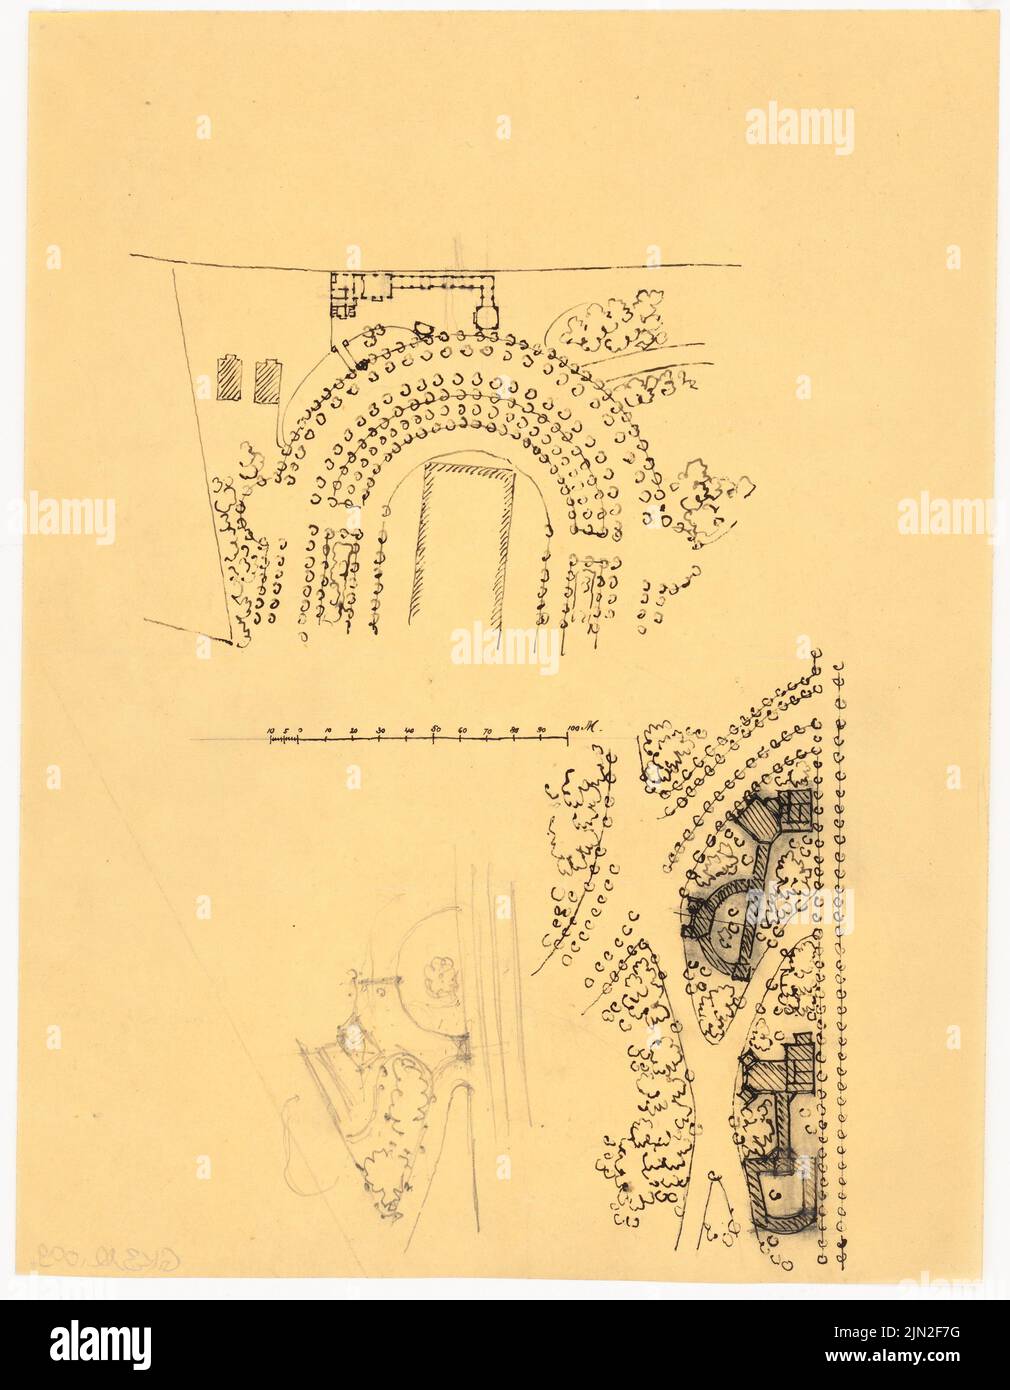 Gustav garlic (1833-1916), horticultural exhibition 1897, Berlin-Treptow: site plan. Ink, pencil on transparent, 31.9 x 24.8 cm (including scan edges) Stock Photo